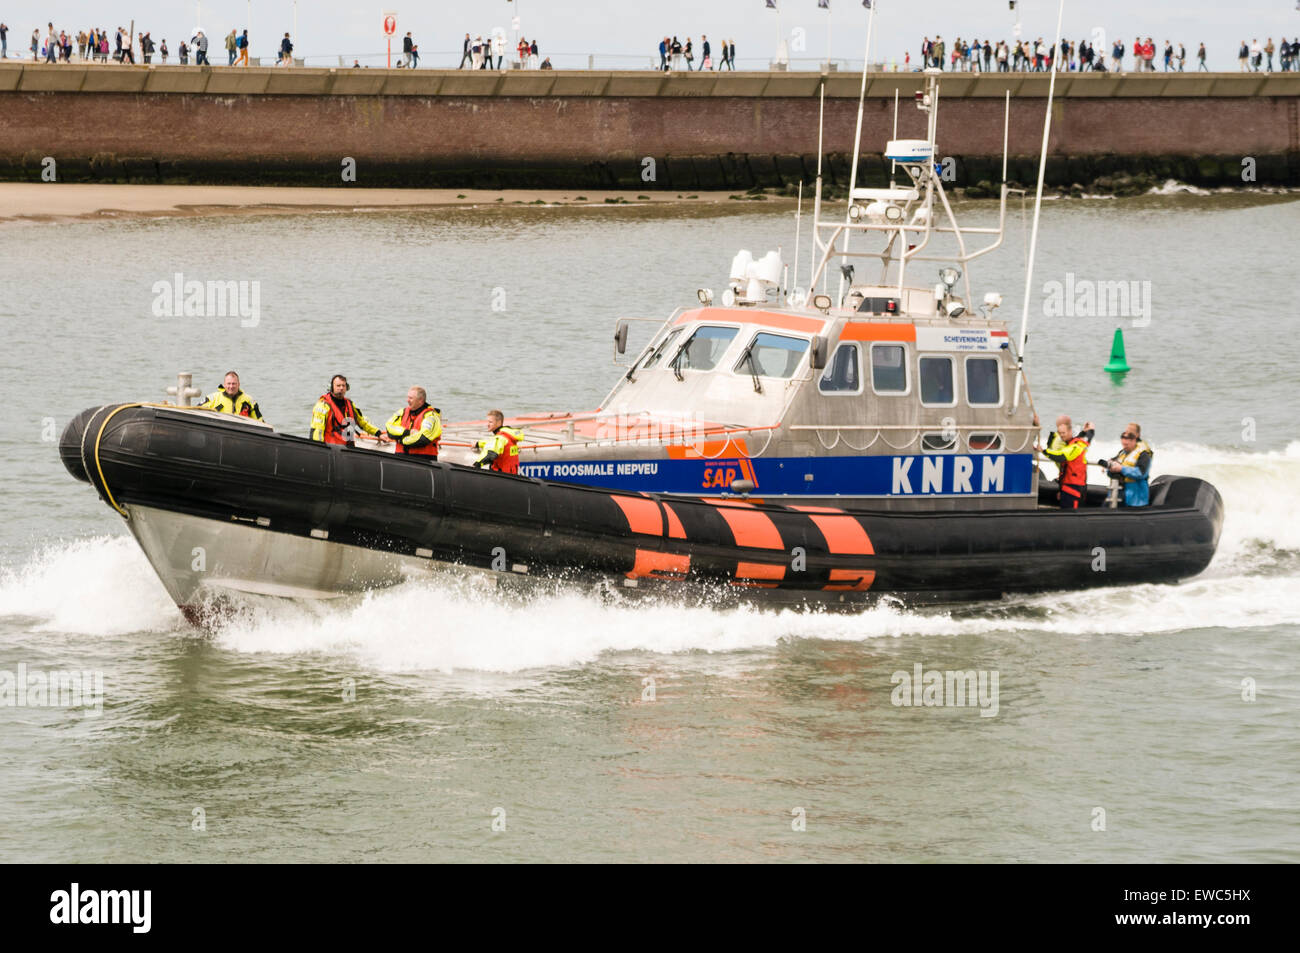 The Kitty Roomale Nepveu, one of the KNRM (Dutch lifeboat rescue service) lifeboats. Stock Photo